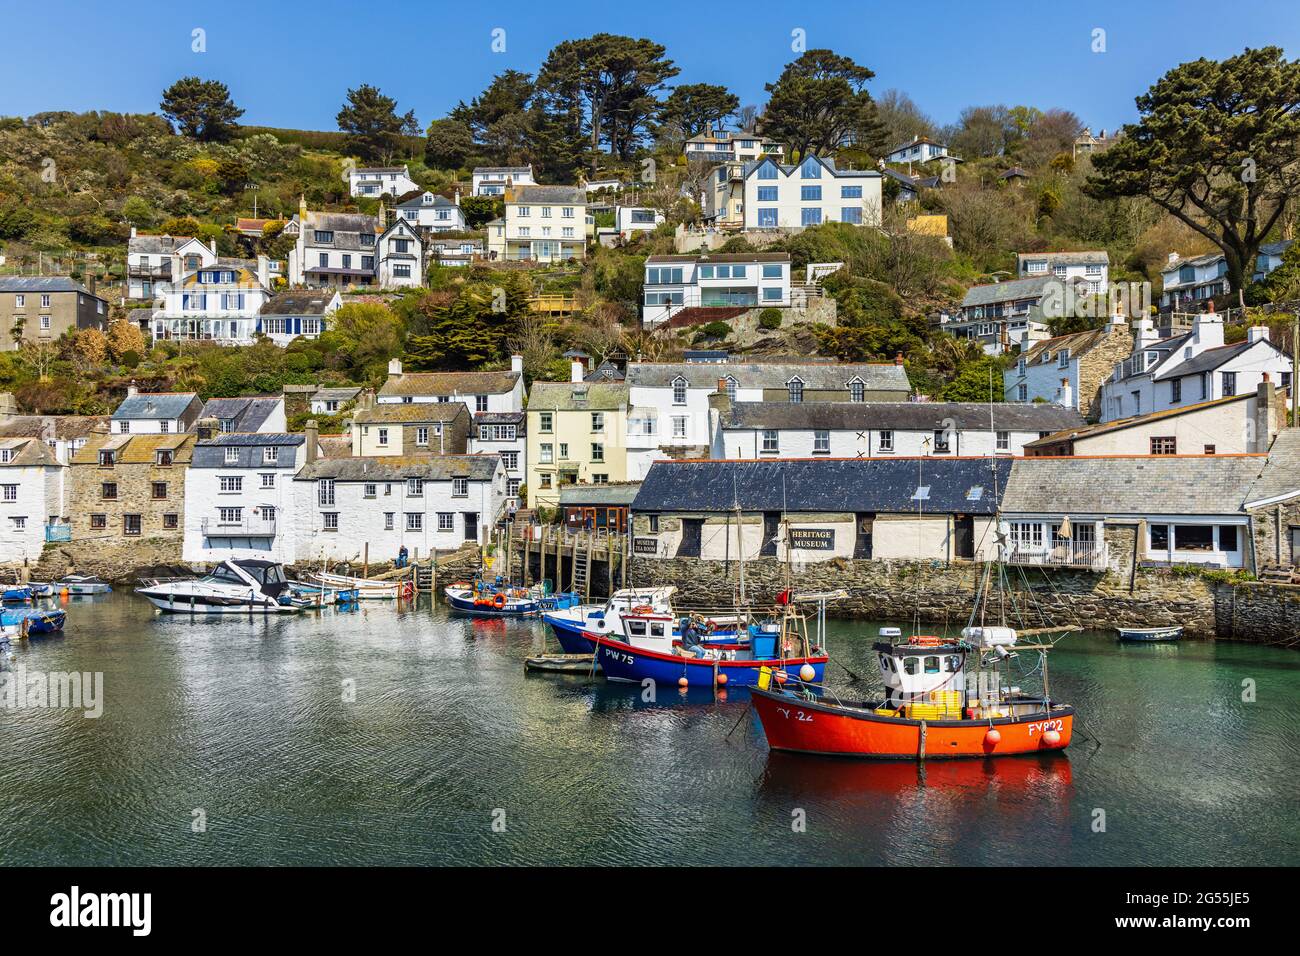 Fishing boats in the harbour at Polperro, a charming and picturesque fishing village in south east Cornwall. Stock Photo